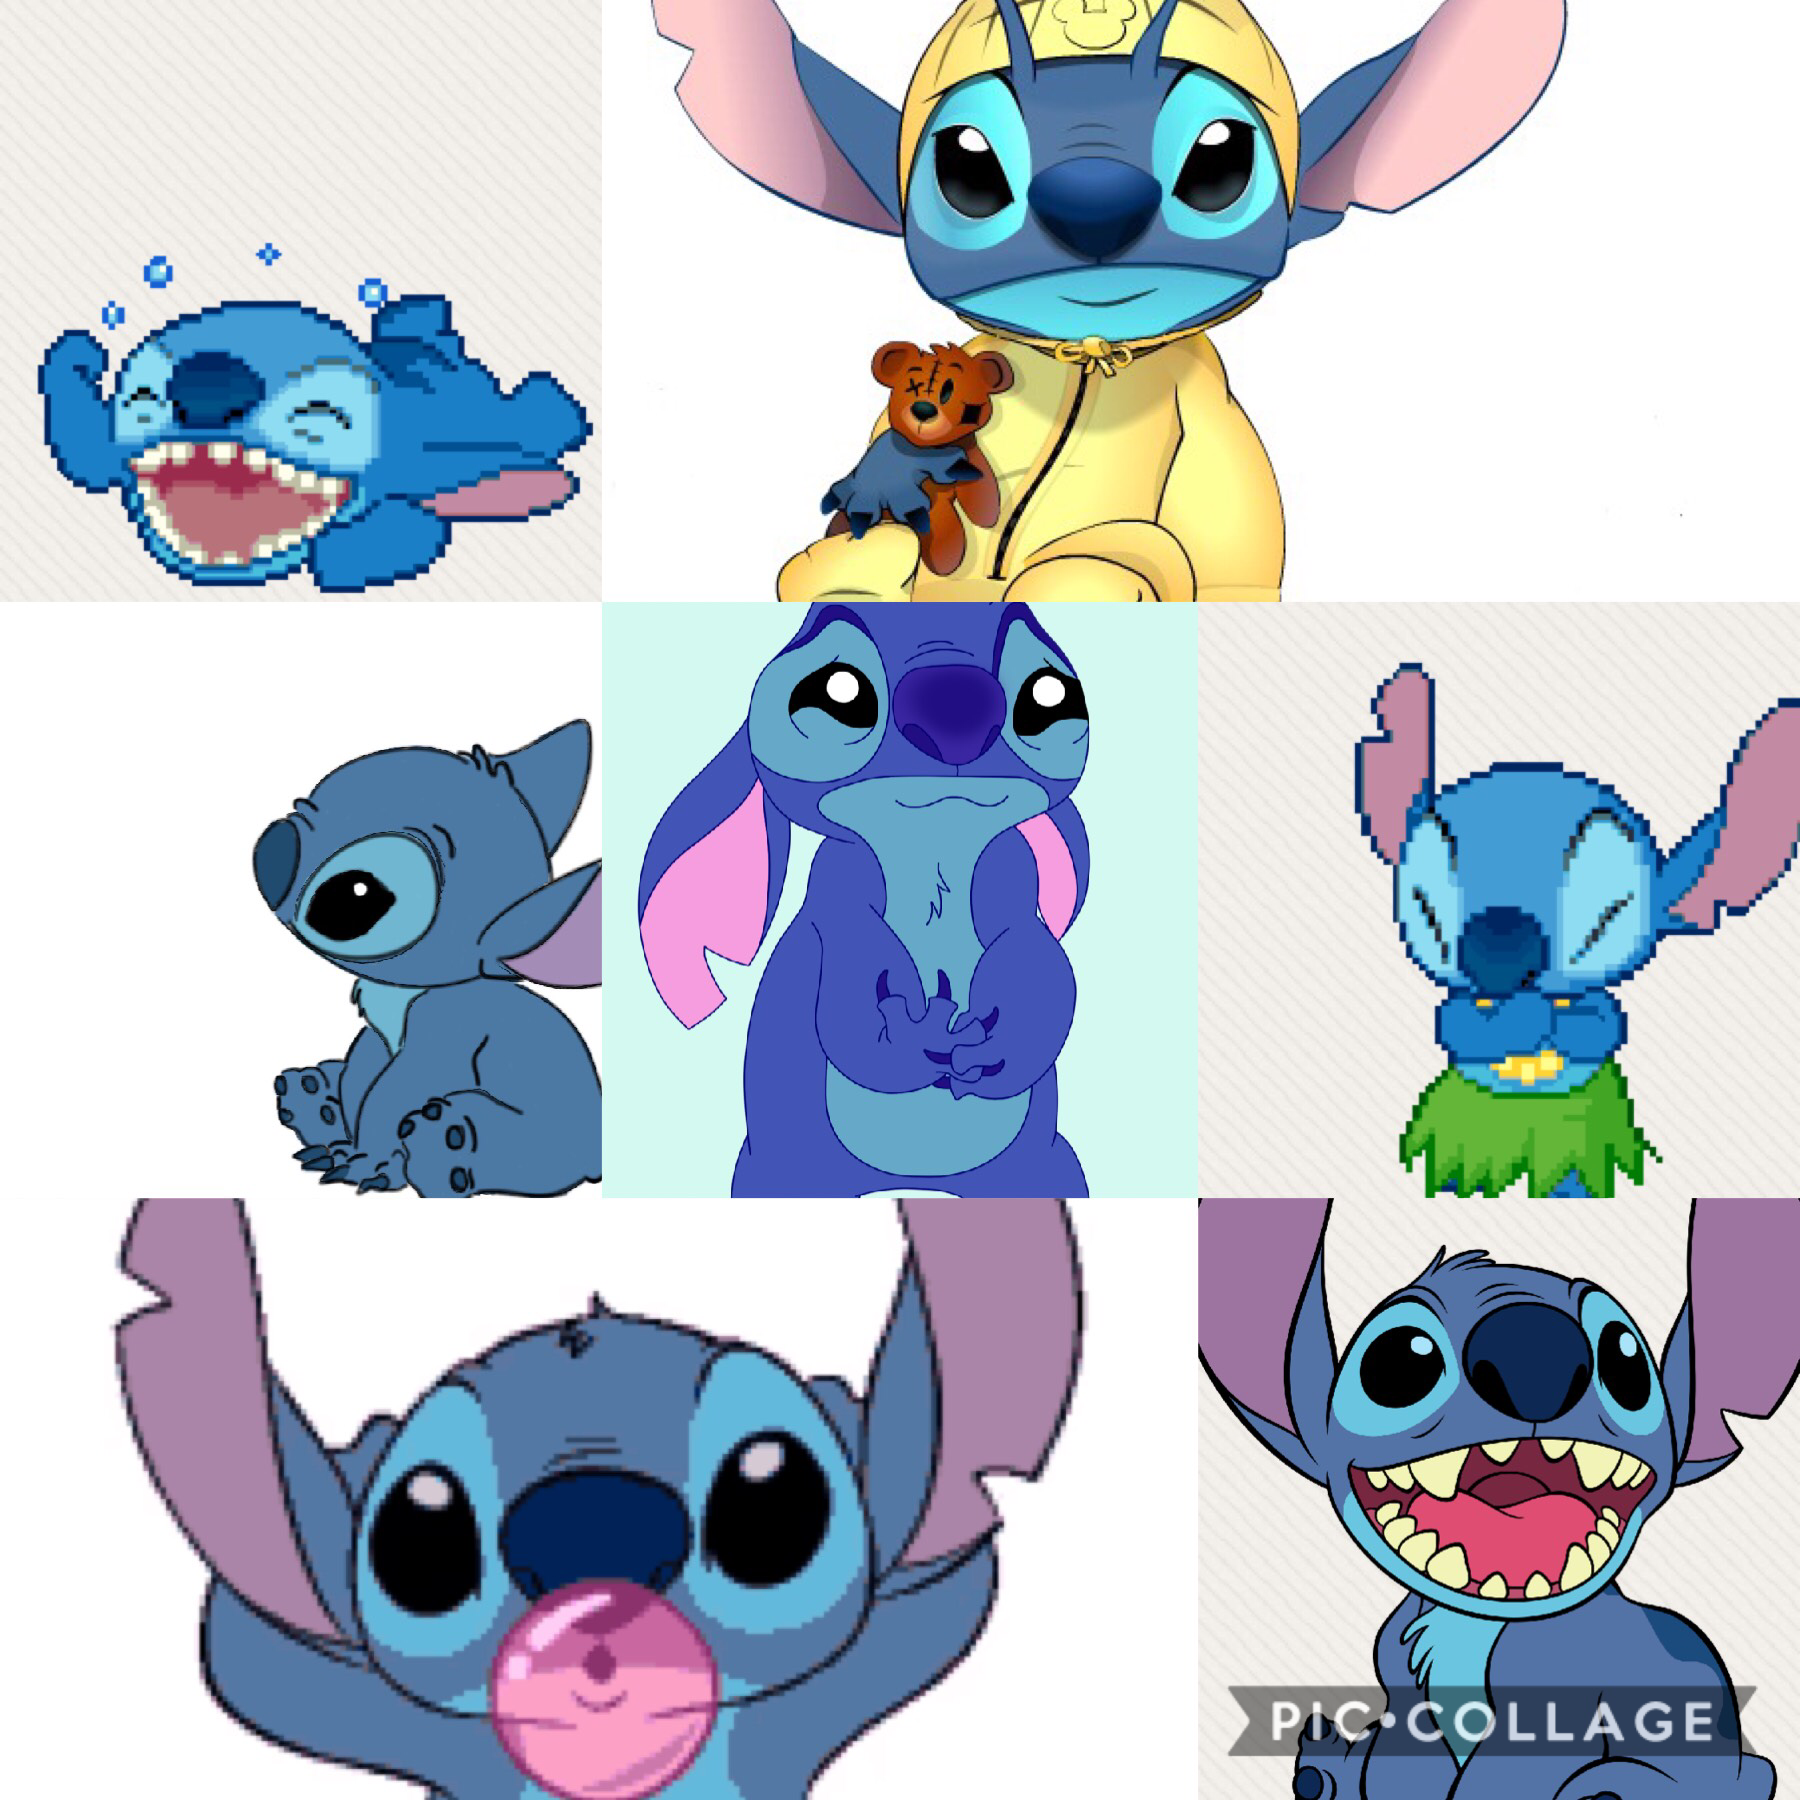 Stitch is the best